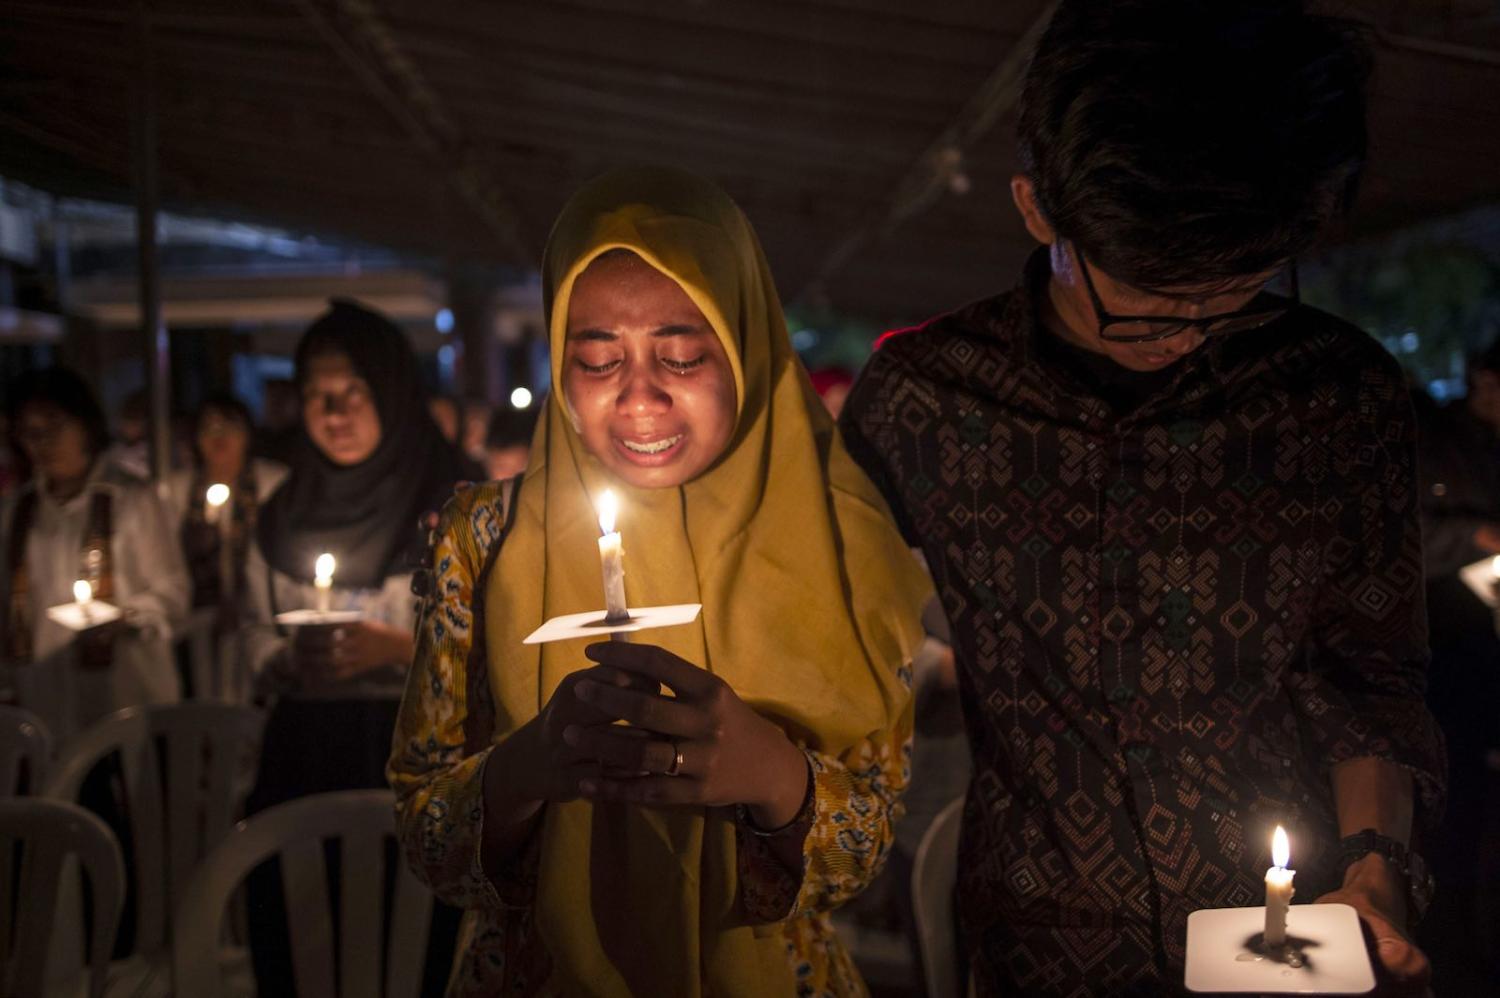 Tears during a candlelight vigil to remember the victims of the 2018 Surabaya suicide bombings (Photo: Juni Kriswanto via Getty)